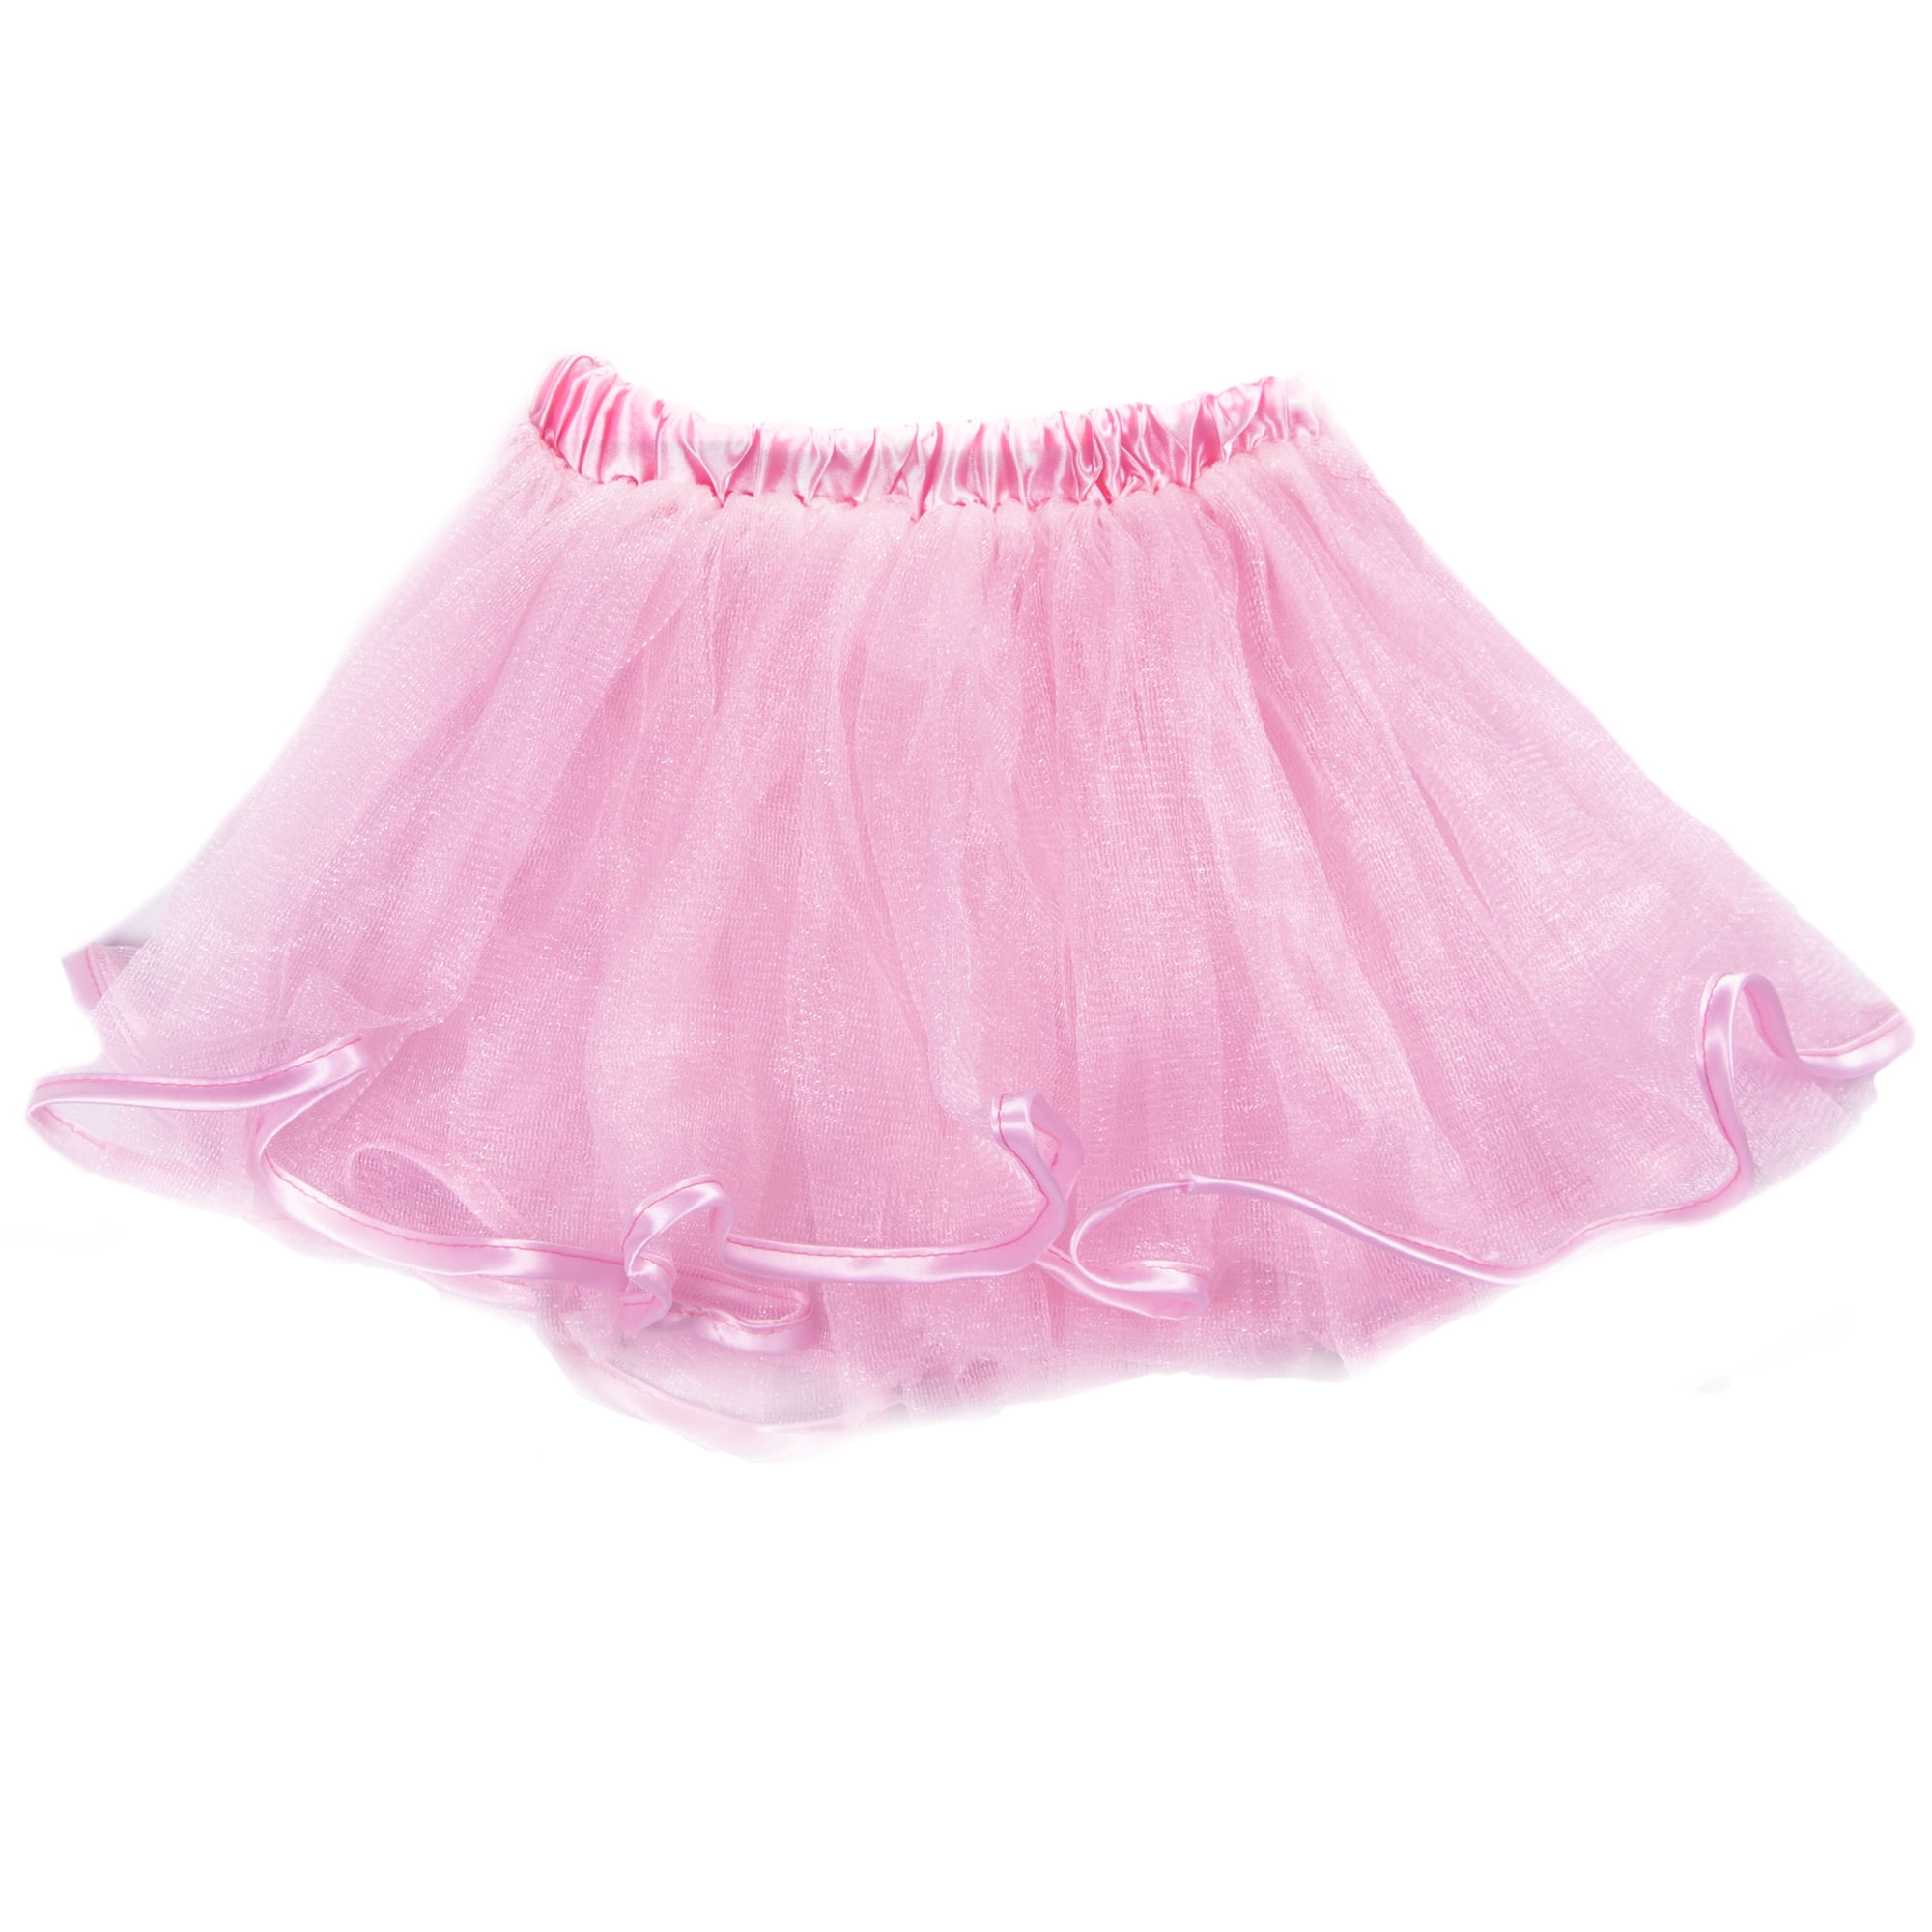 Picture of Brybelly MCOS-501 Light Pink Costume Tutu